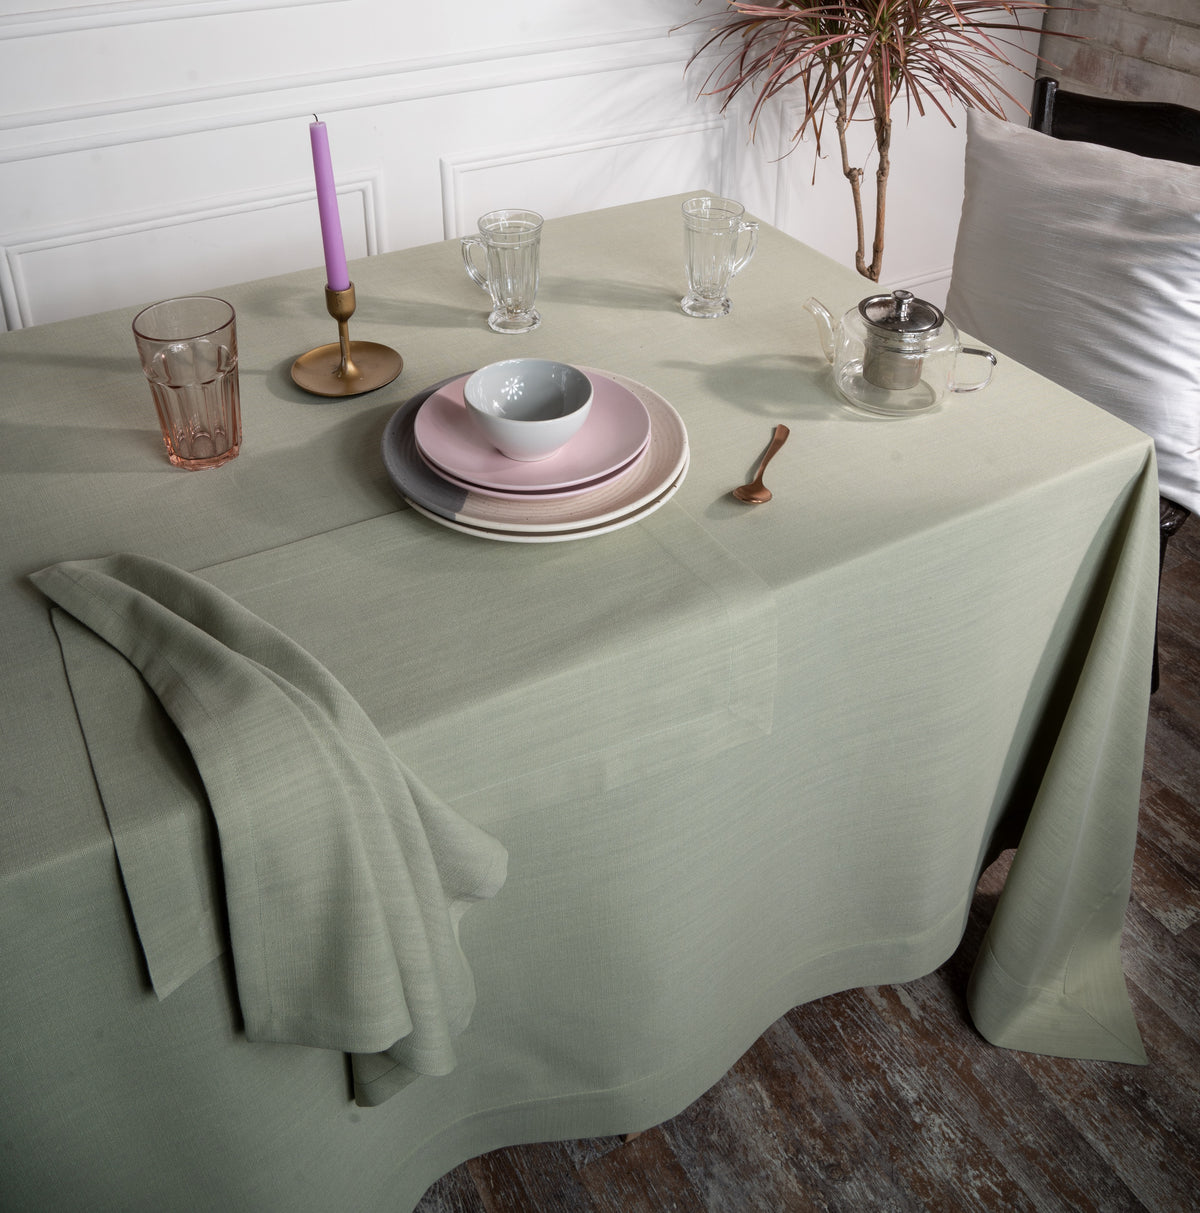 Sage Green Linen Look Recycled Fabric Mitered Corner Tablecloth